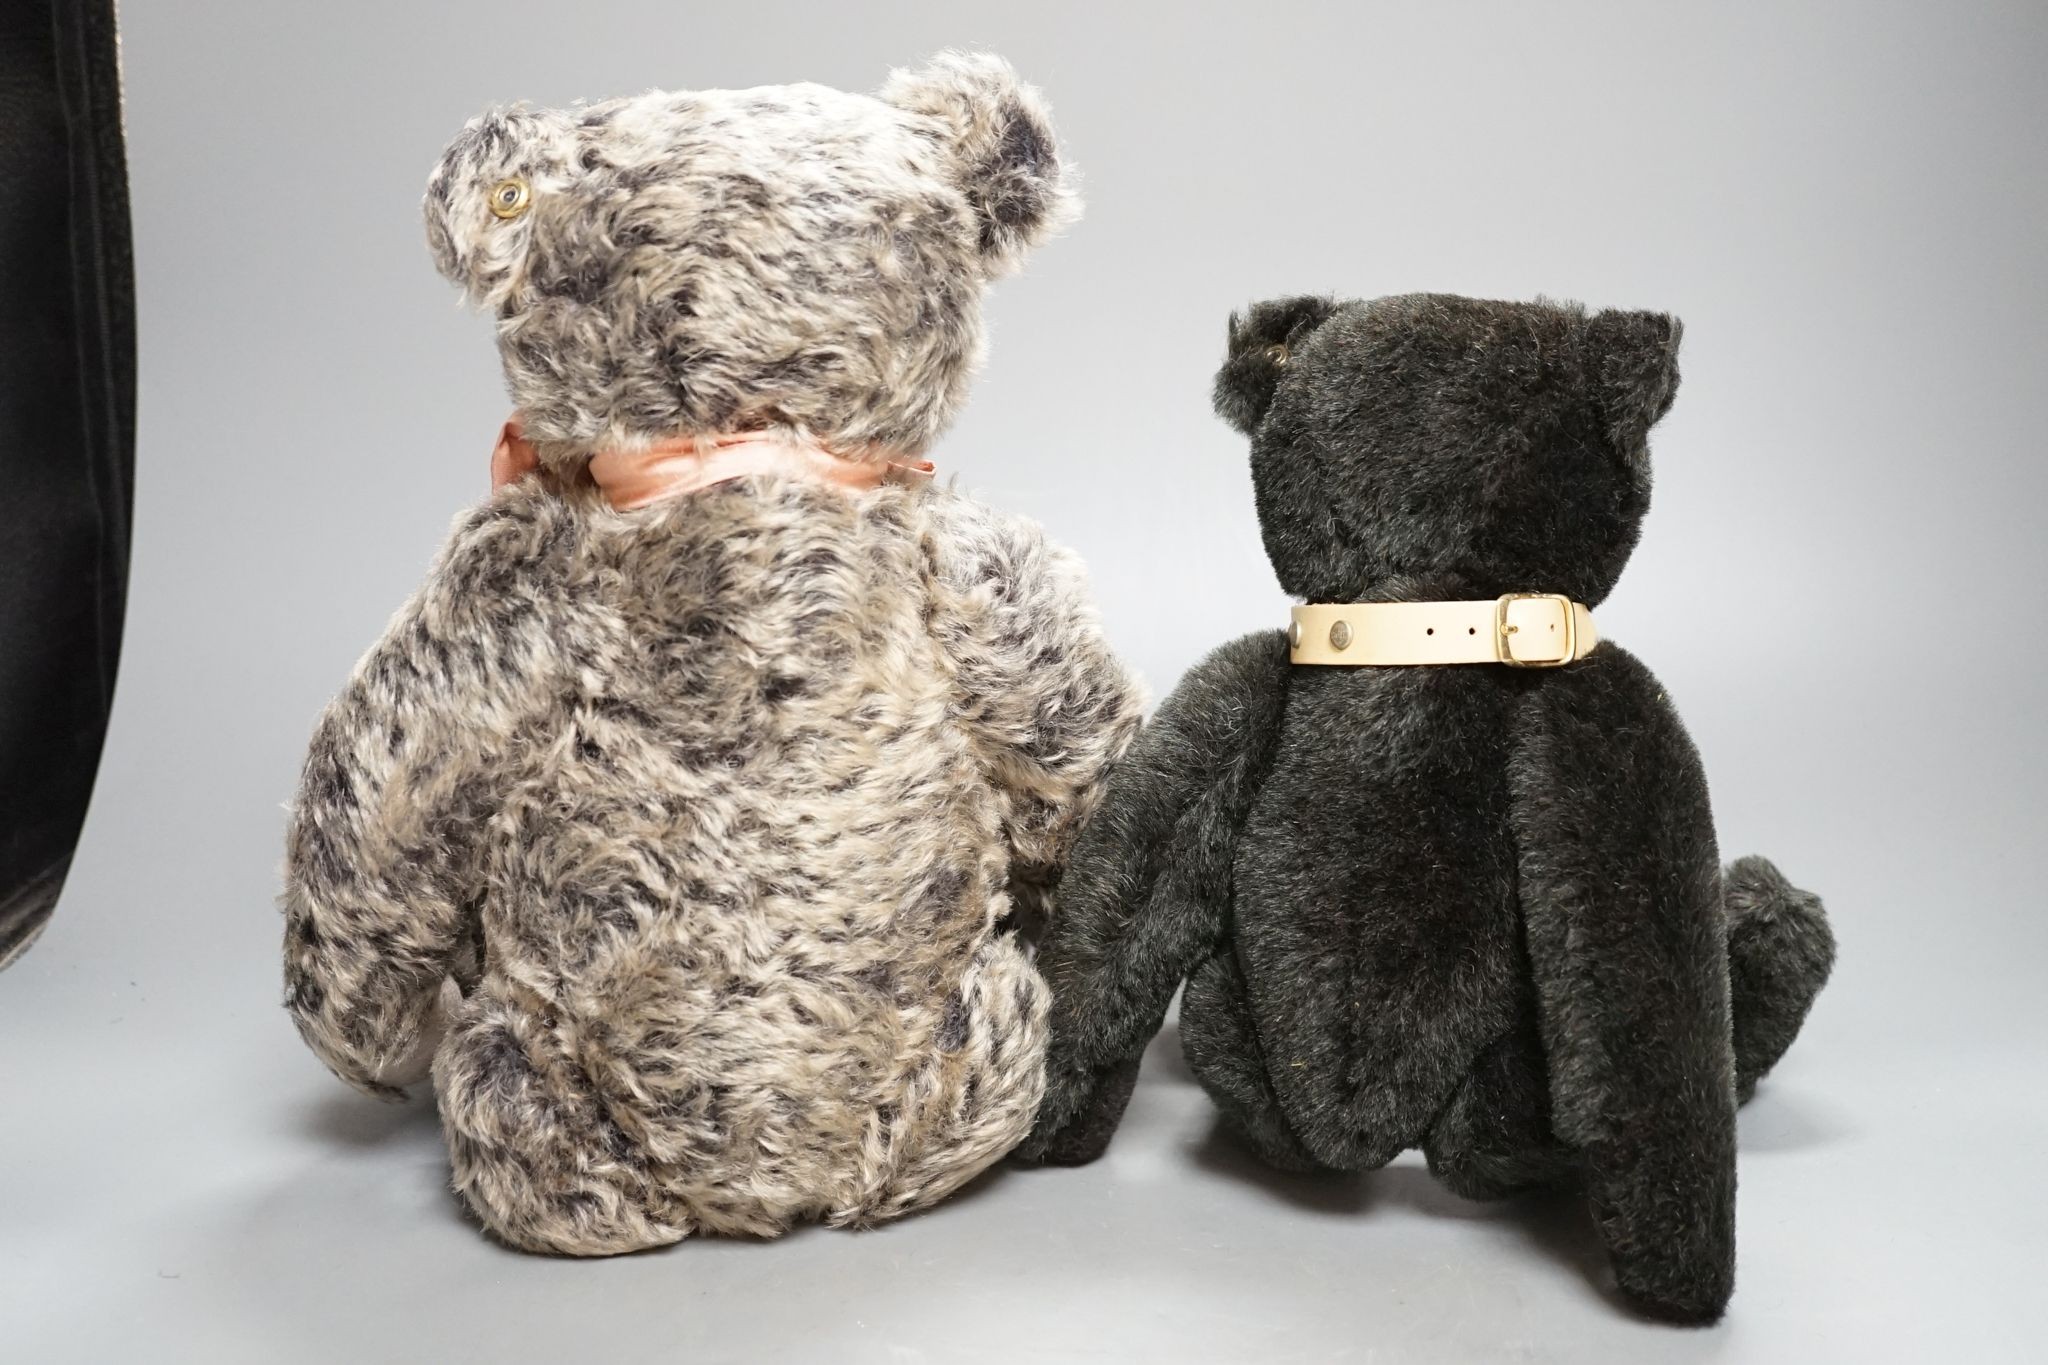 A Steiff ‘Old Black Bear’, Limited Edition with box and certificate 2007, 40cm, with Alpaca Bear, with box and certificate